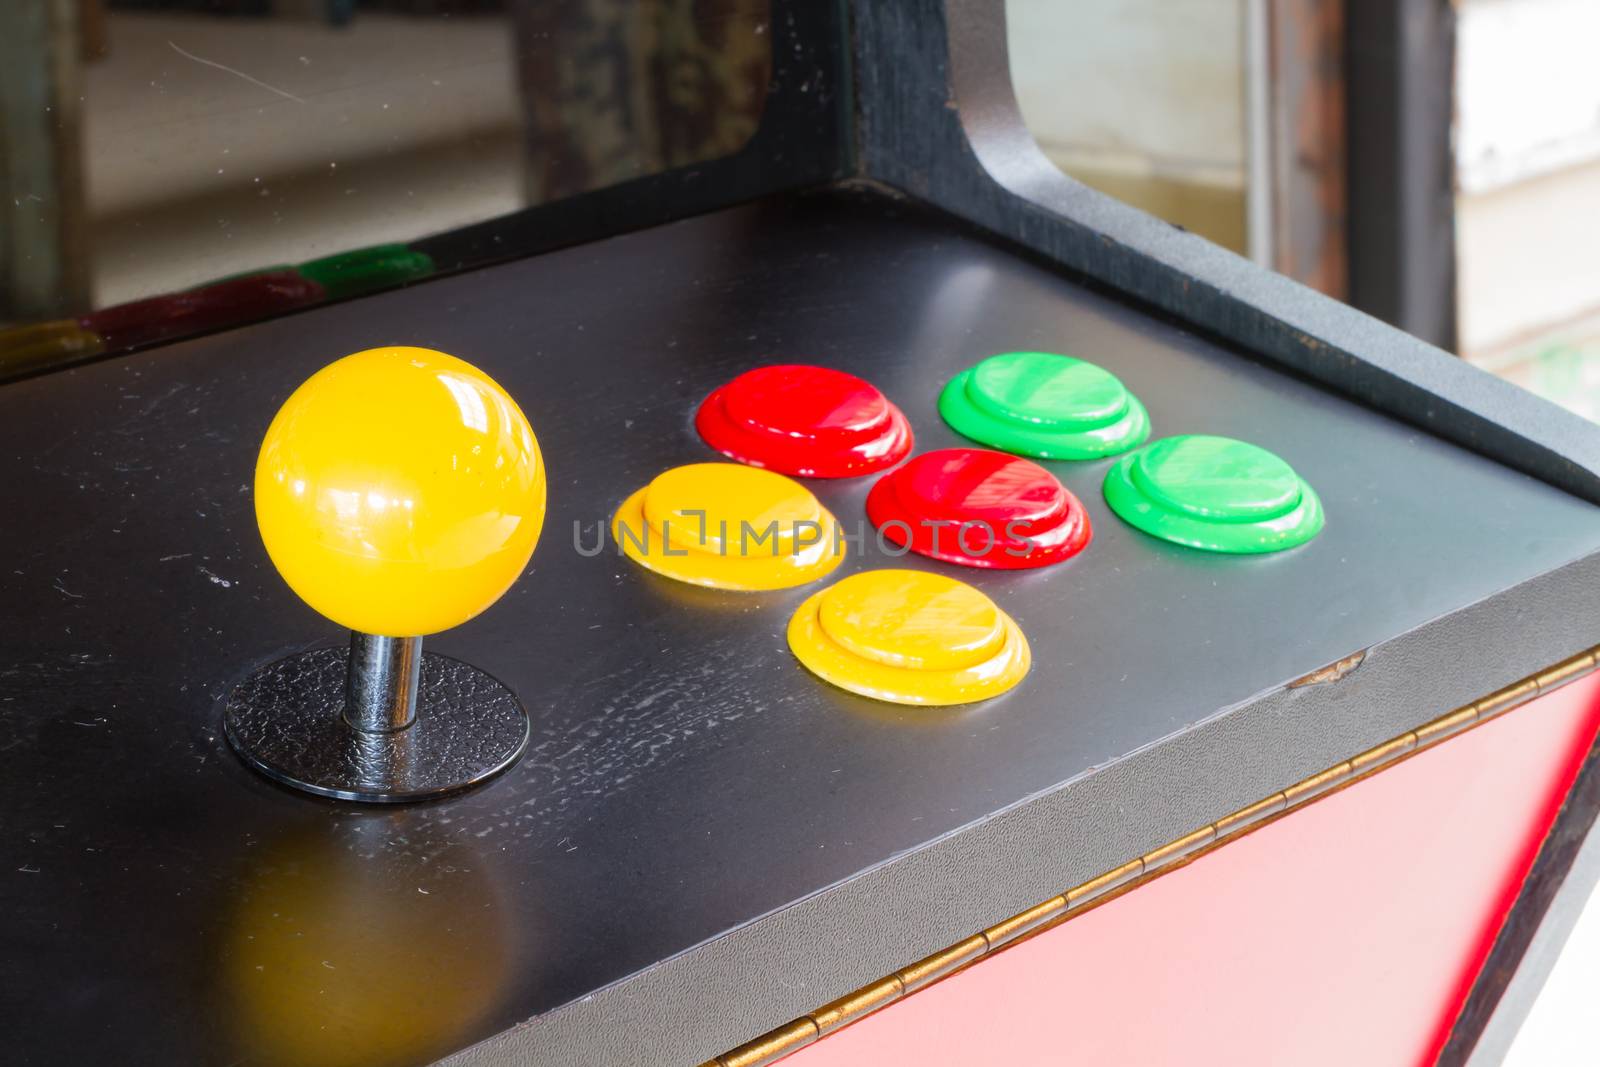 yellow joystick of an old arcade video game with six colorful button